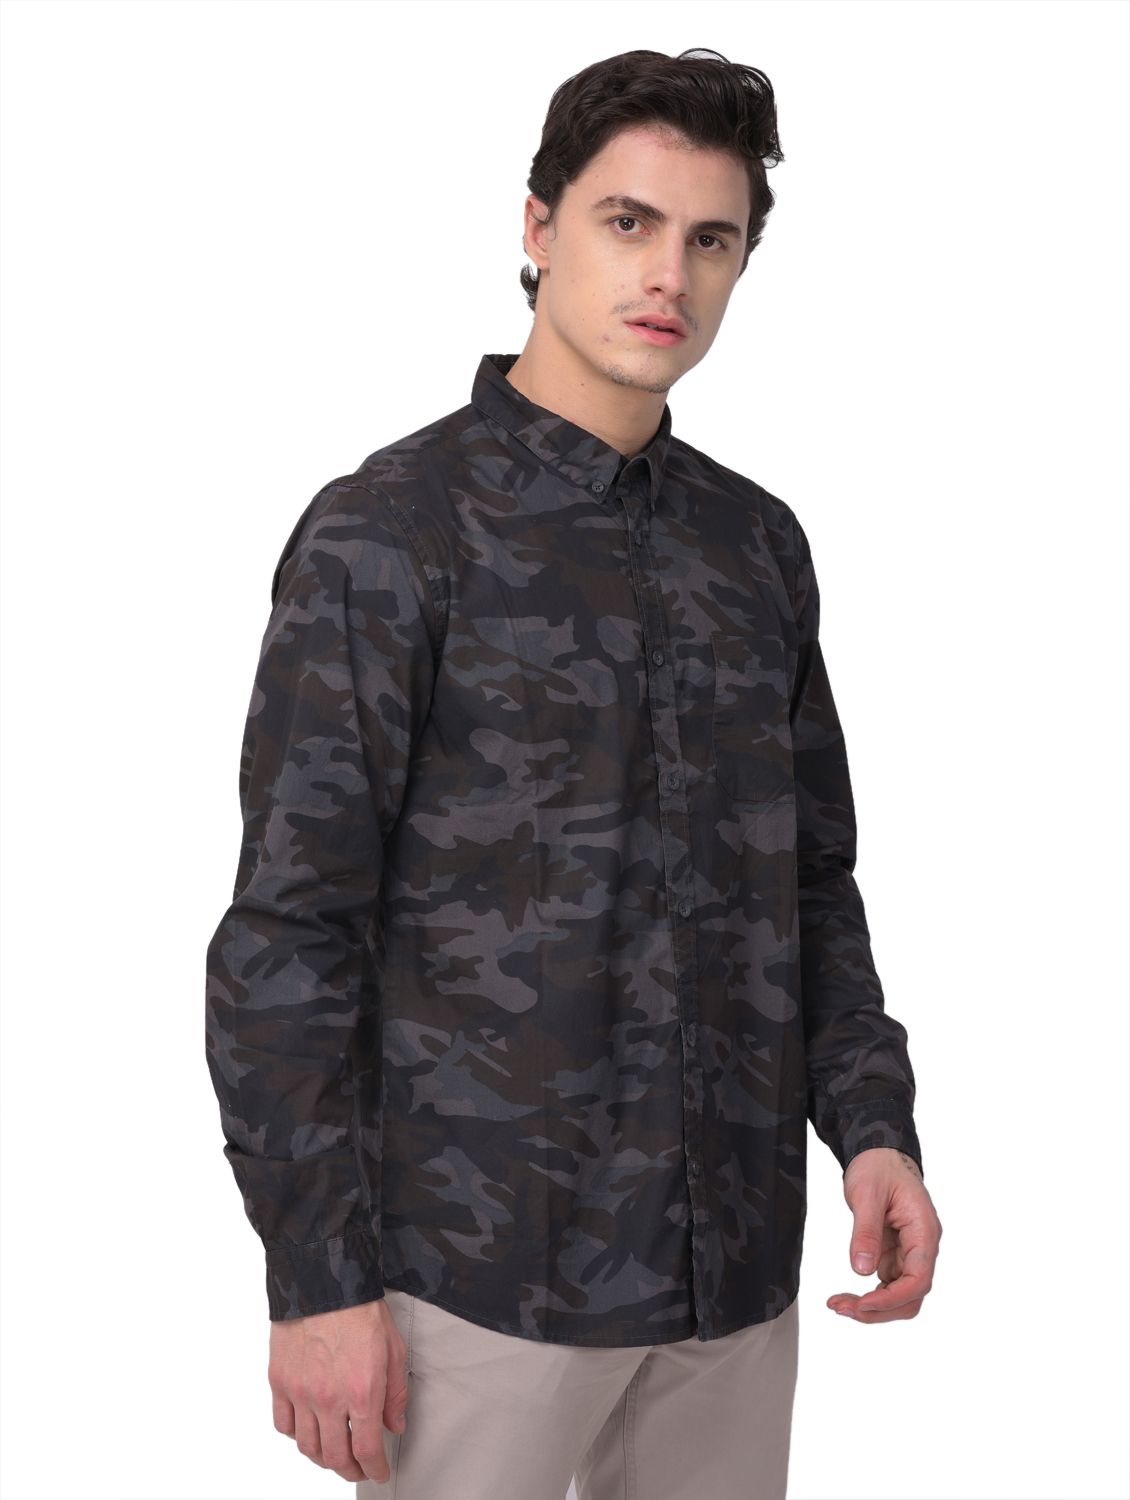 Camouflage grey shirt for men